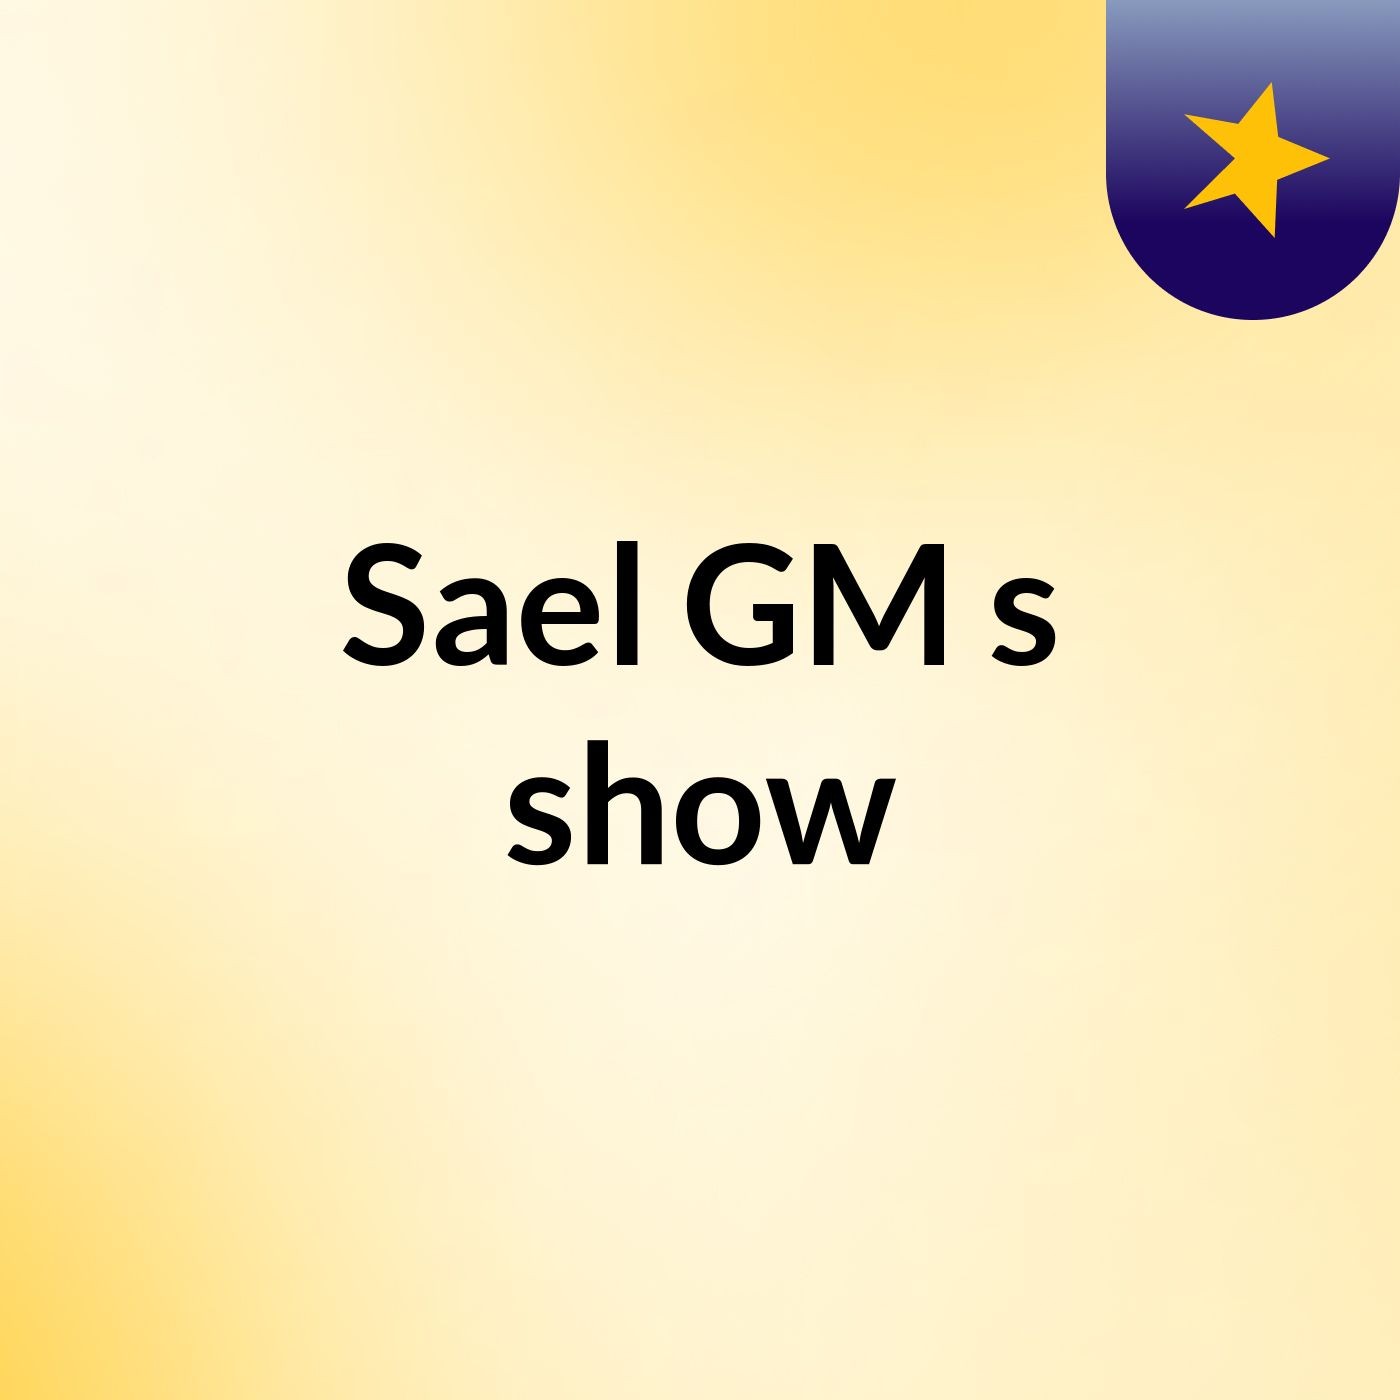 Sael GM's show